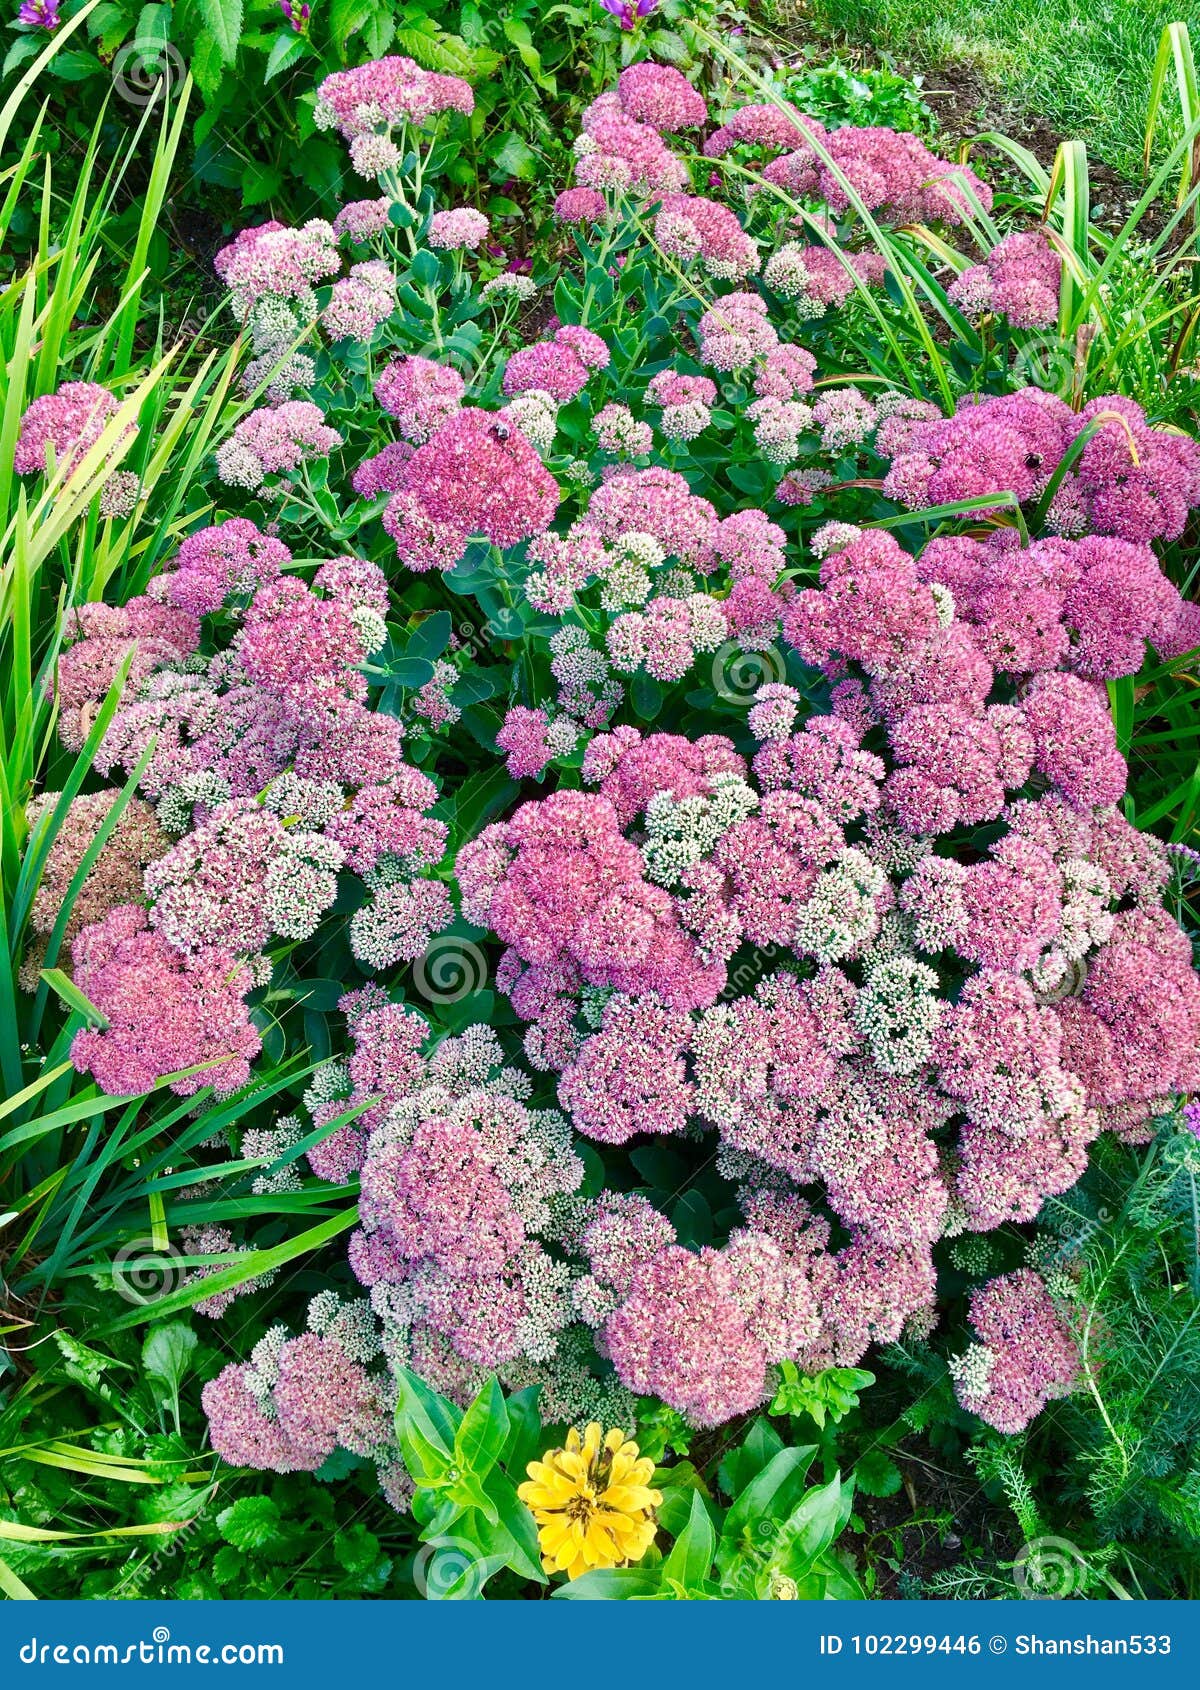 Achillea flowers blooming stock photo. Image of pink - 102299446